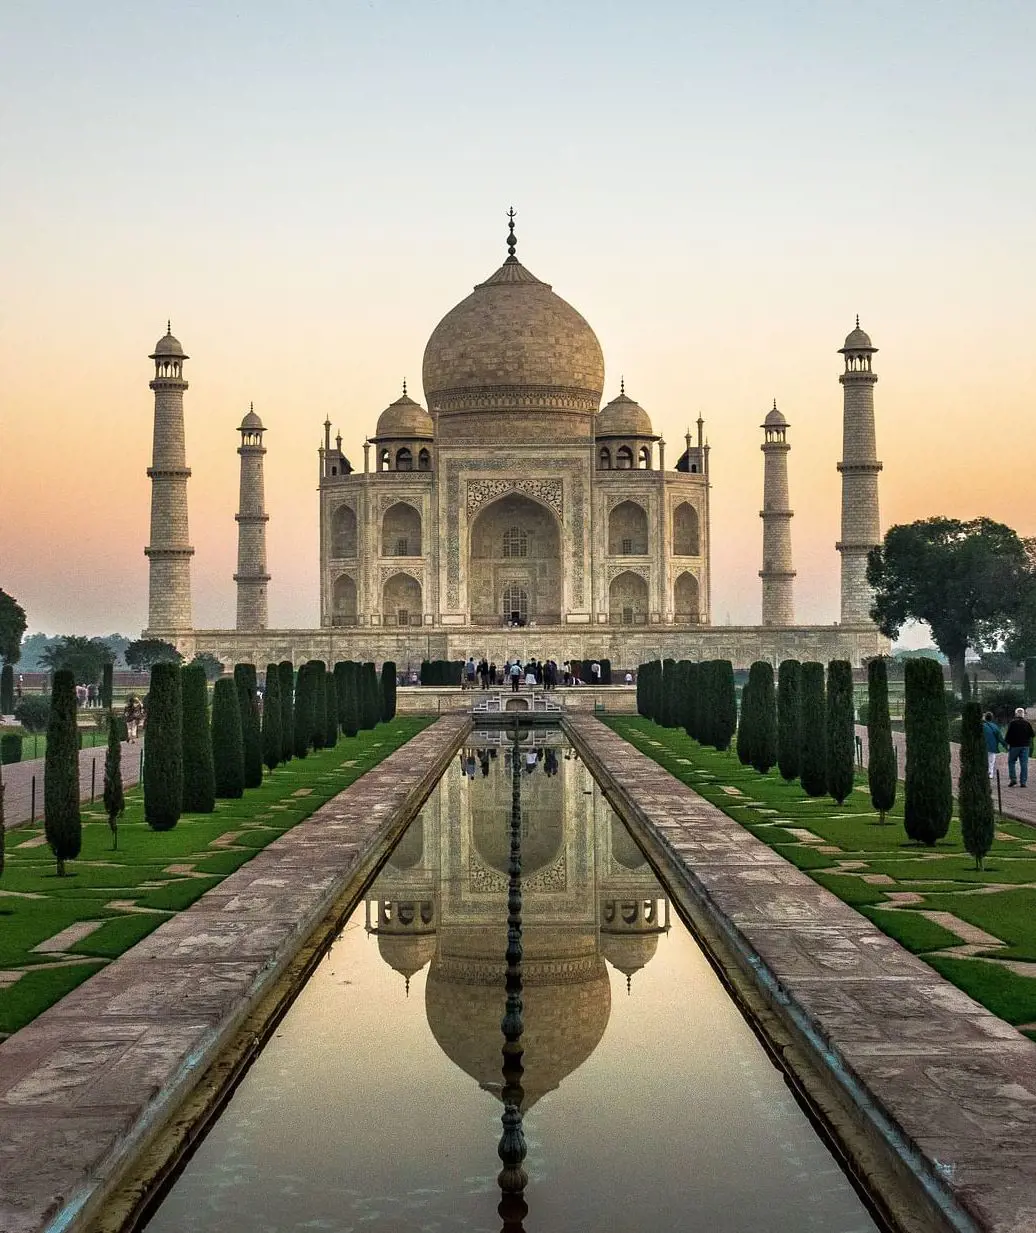 Taj Mahal was the winner of the New Seven Wonders of the World initiative in 2007